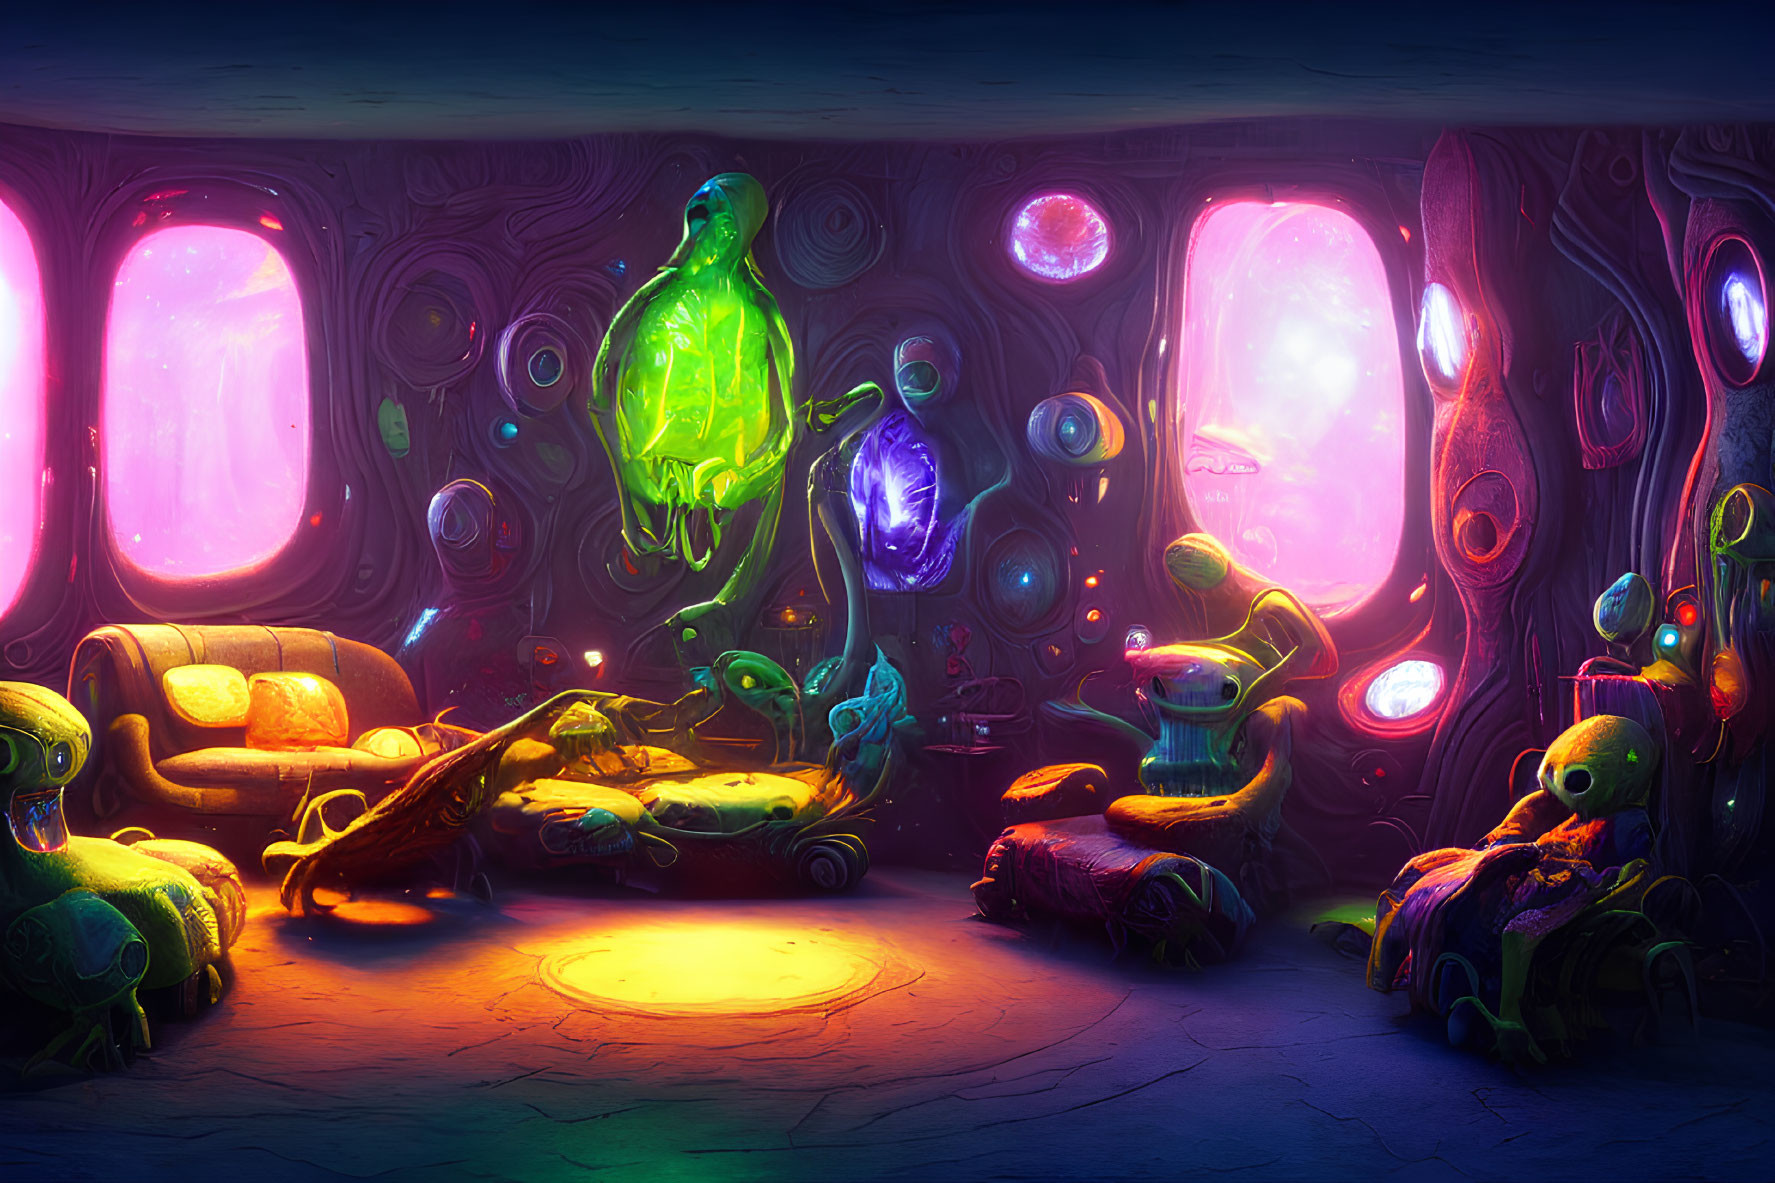 Colorful Alien Spaceship Interior with Glowing Furnishings